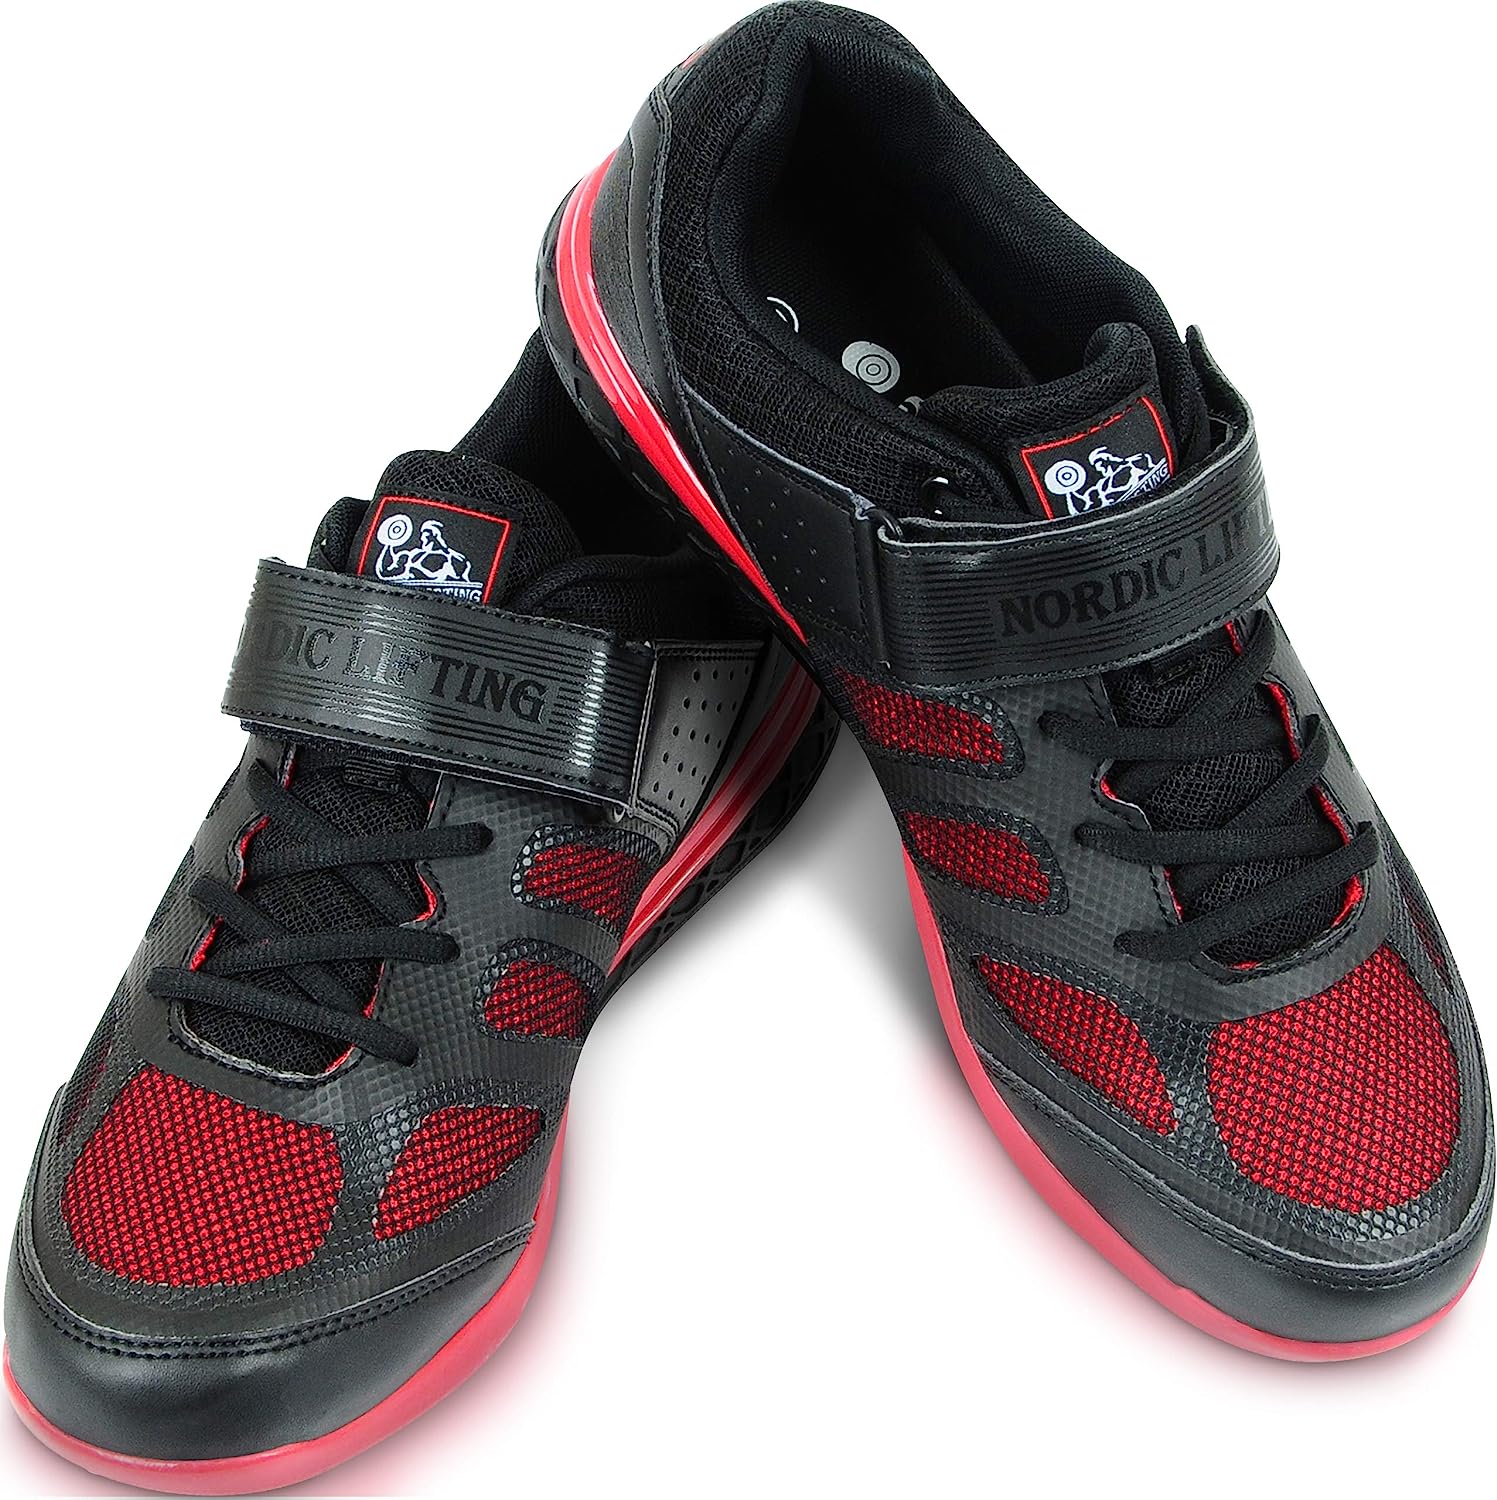 Nordic Lifting Weightlifting Shoes Ideal for Crossfit [...]